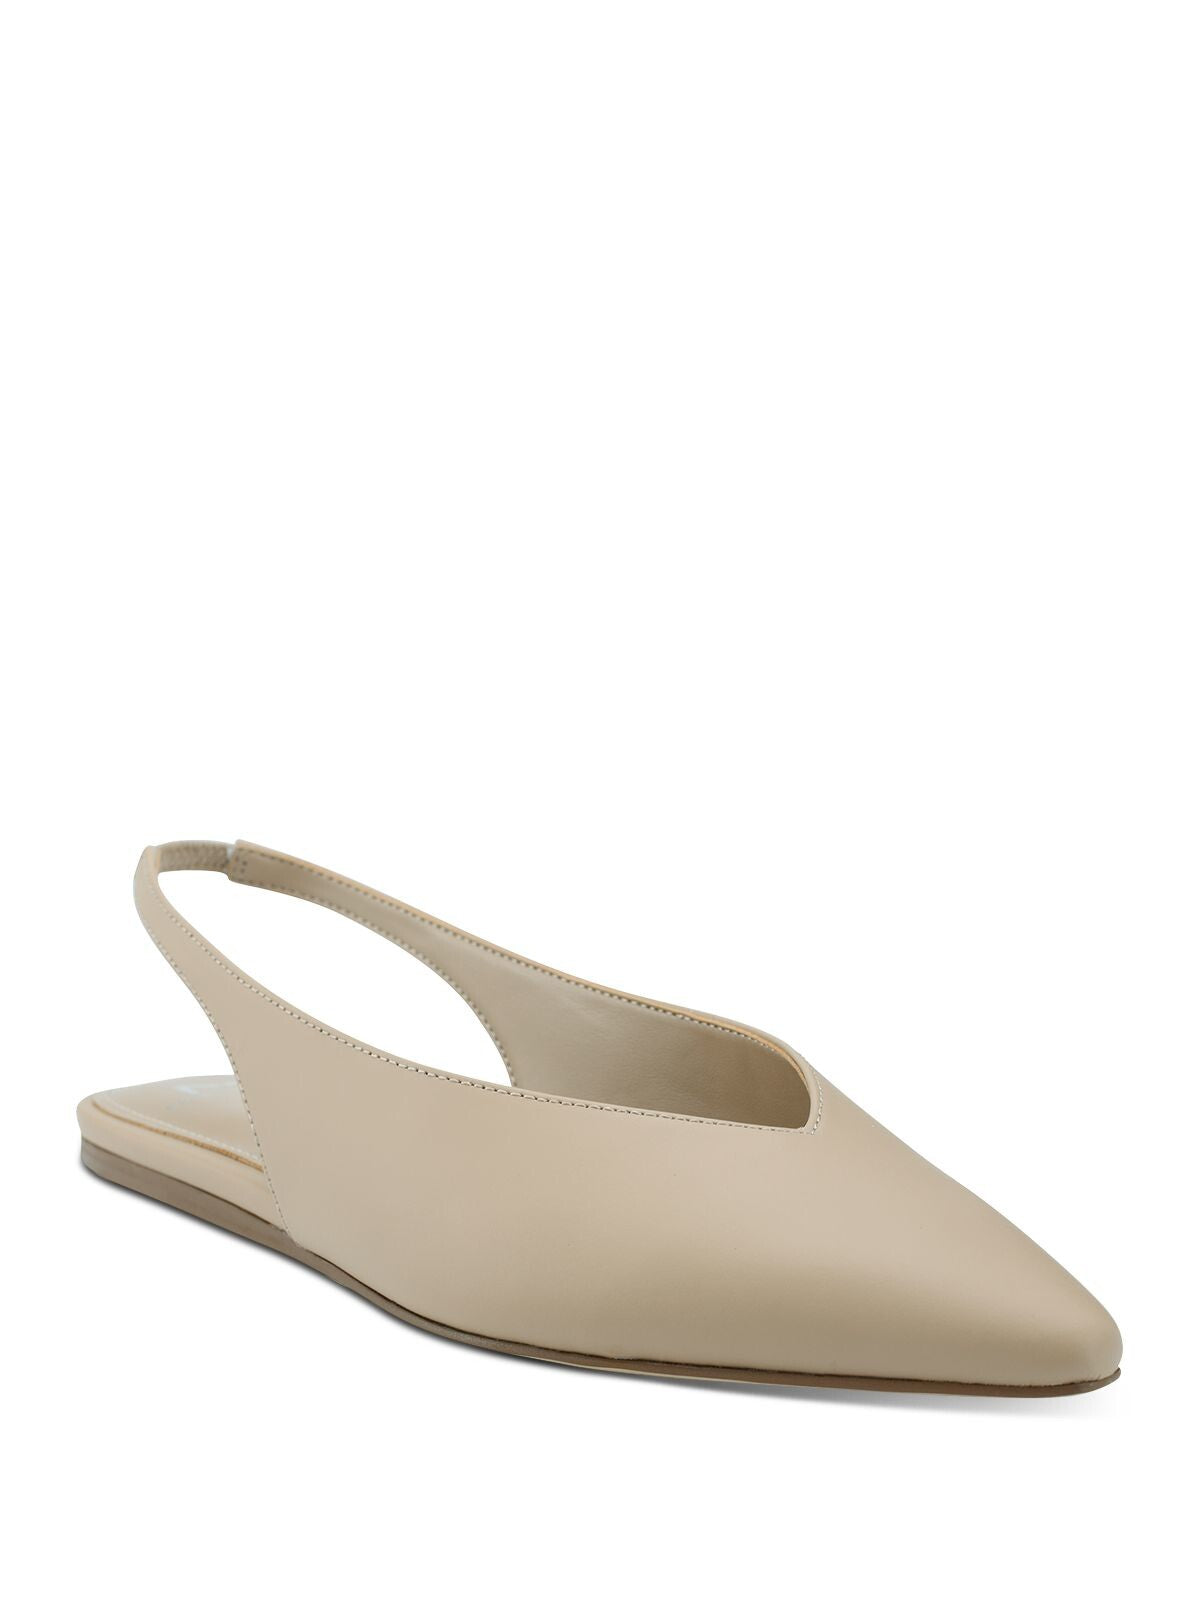 MARC FISHER Womens Beige Slingback Padded Graceful Pointed Toe Slip On Leather Flats Shoes 5.5 M